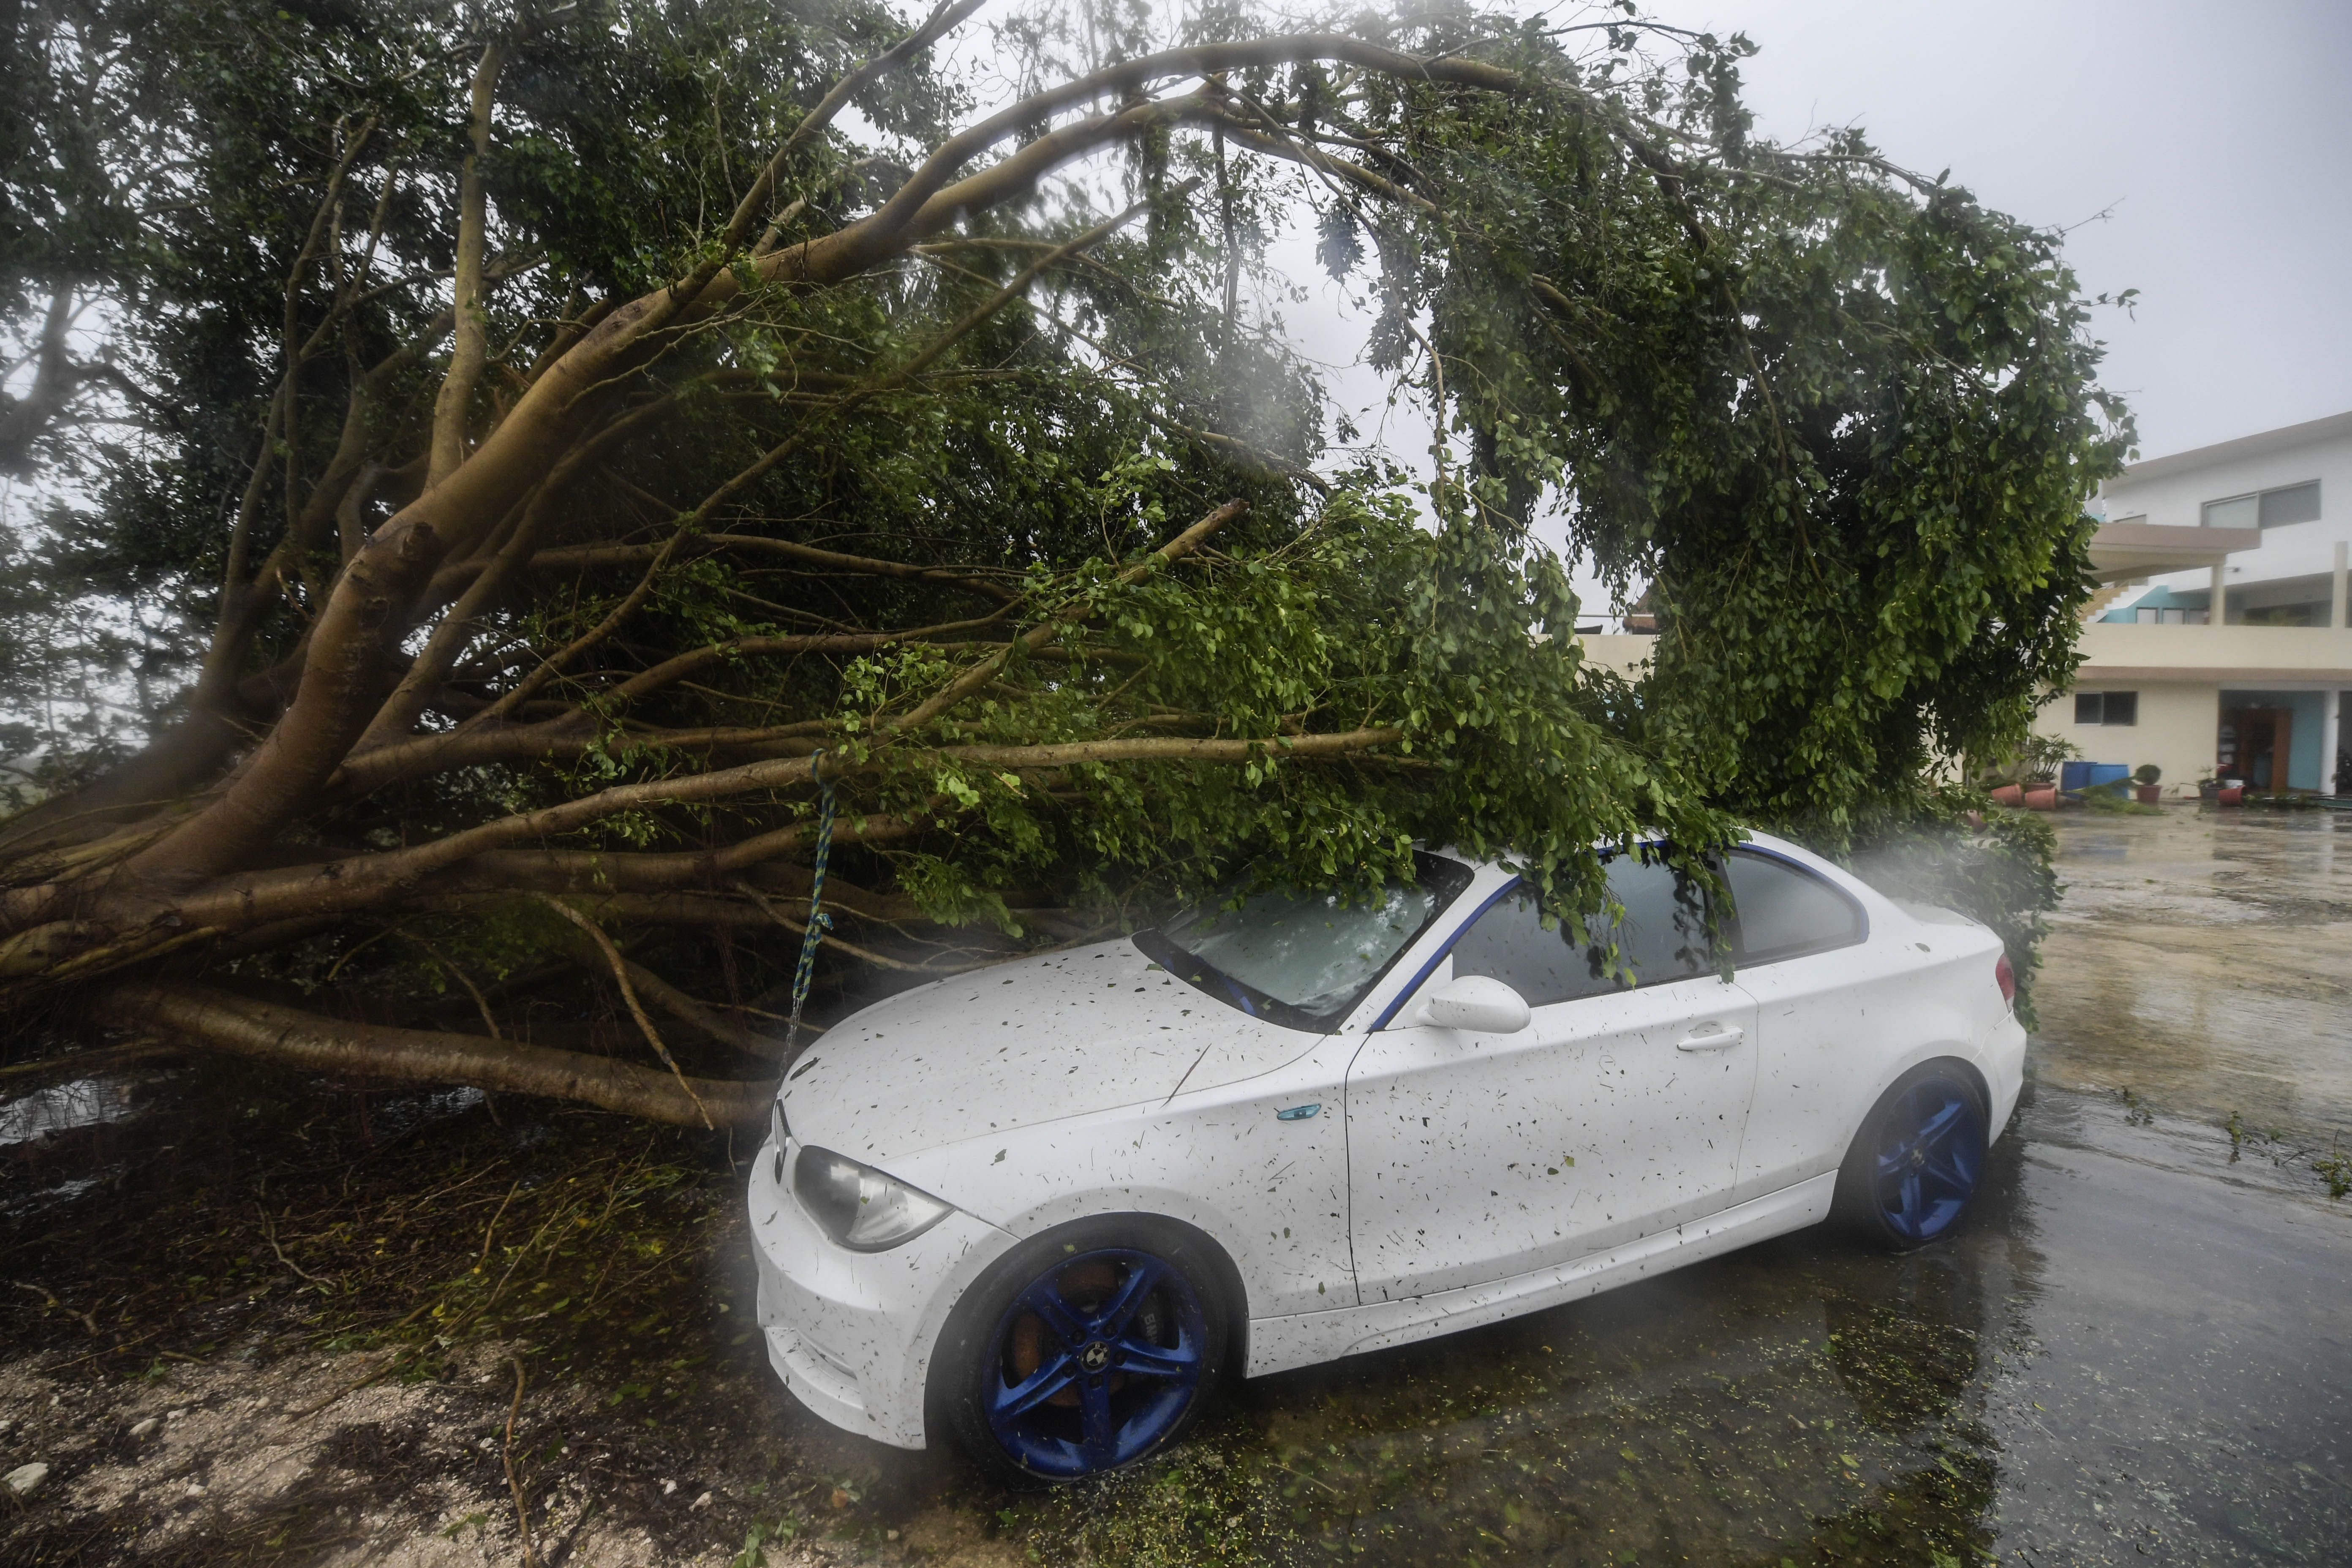  A car is covered under a fallen tree after the passage of Hurricane Delta, in Cancun, Quintana Roo state, Mexico, on October 7